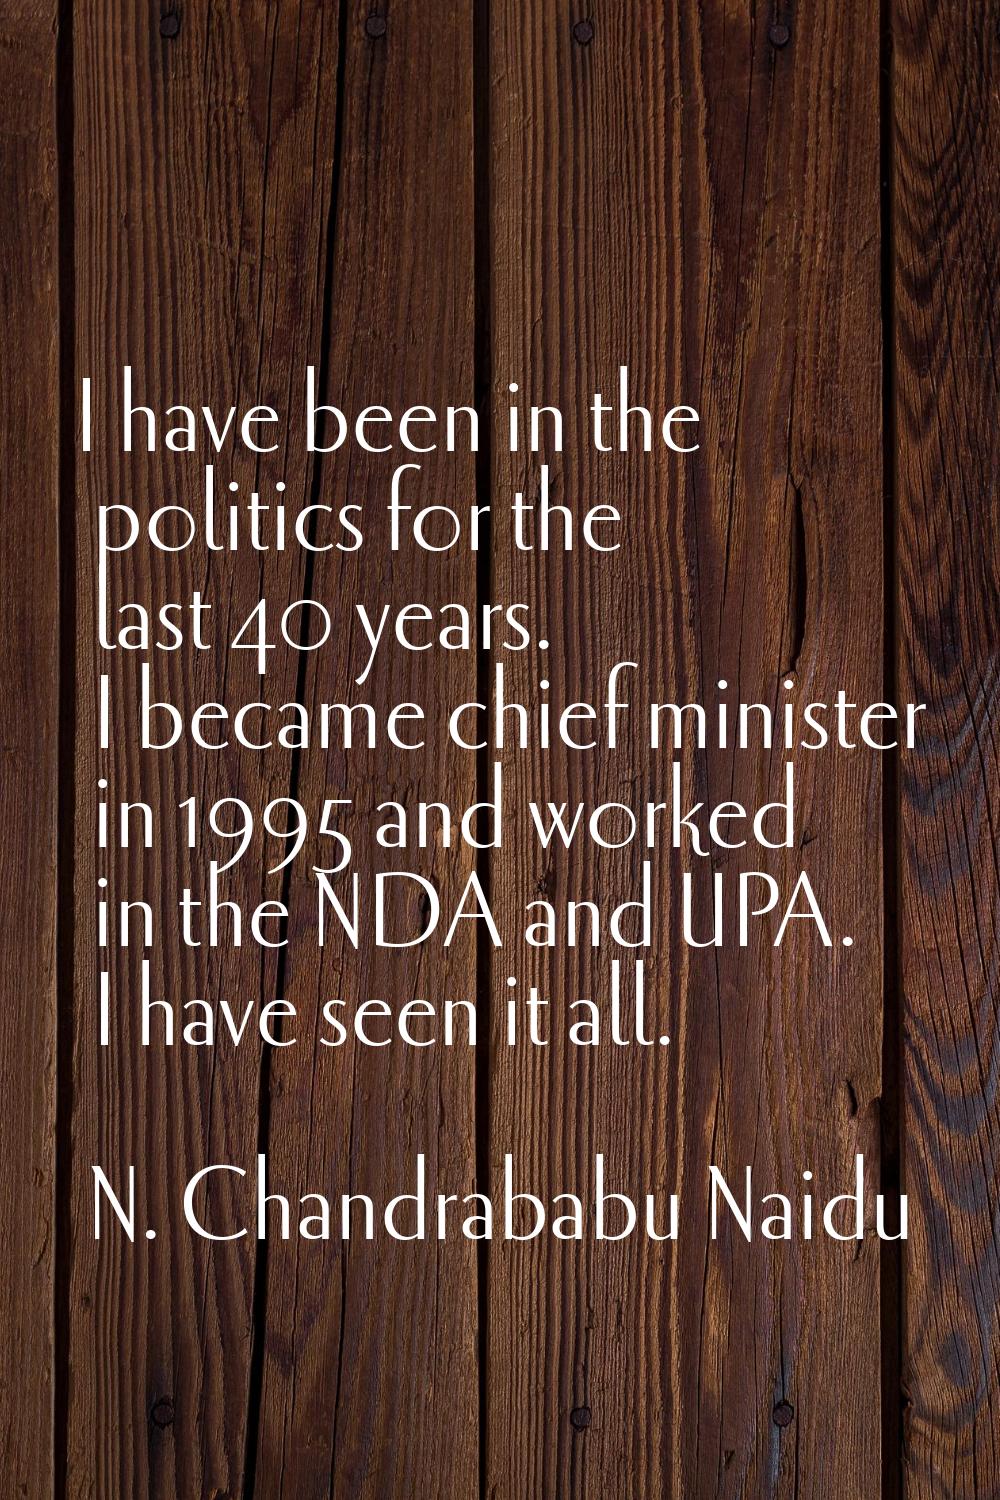 I have been in the politics for the last 40 years. I became chief minister in 1995 and worked in th